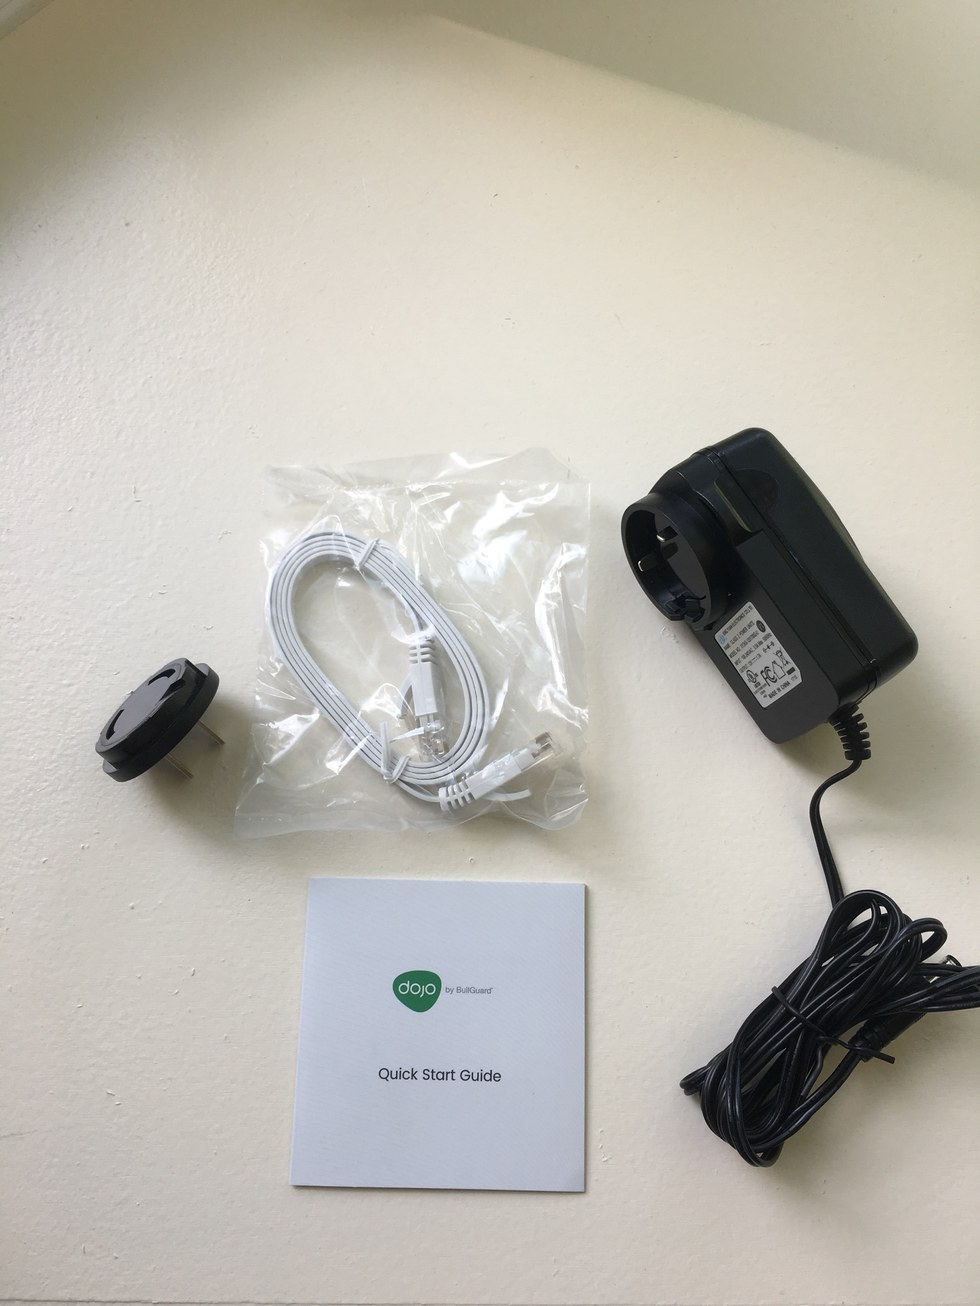 Dojo's Power Cords, Ethernet Cable and Quick Start Guide